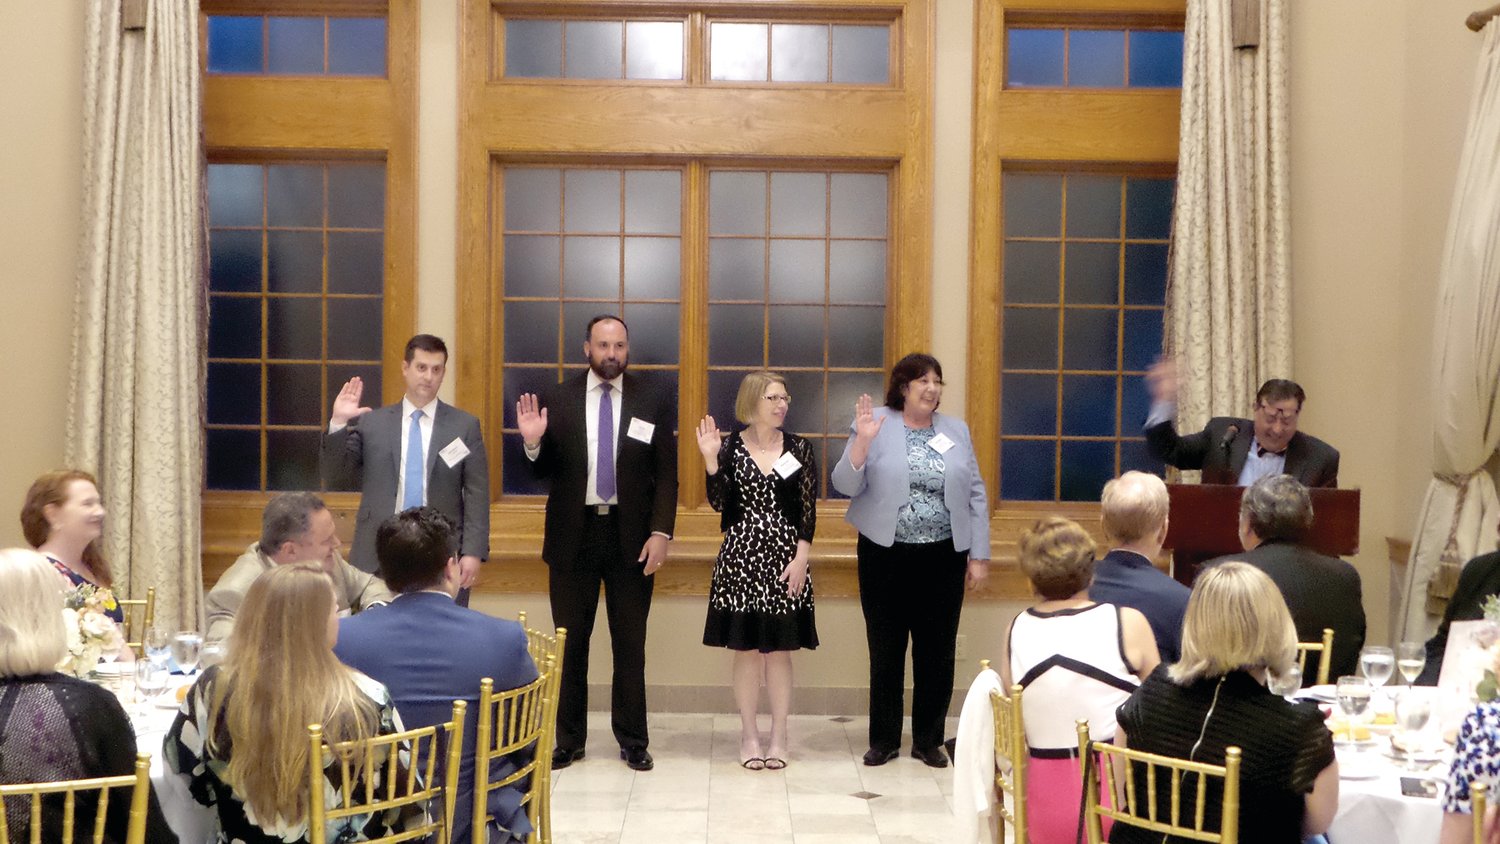 Christopher Carroll, second from left, and Dorothy Jaworski, far right, are installed as treasurer, president of Financial Managers Society Philadelphia Chapter.